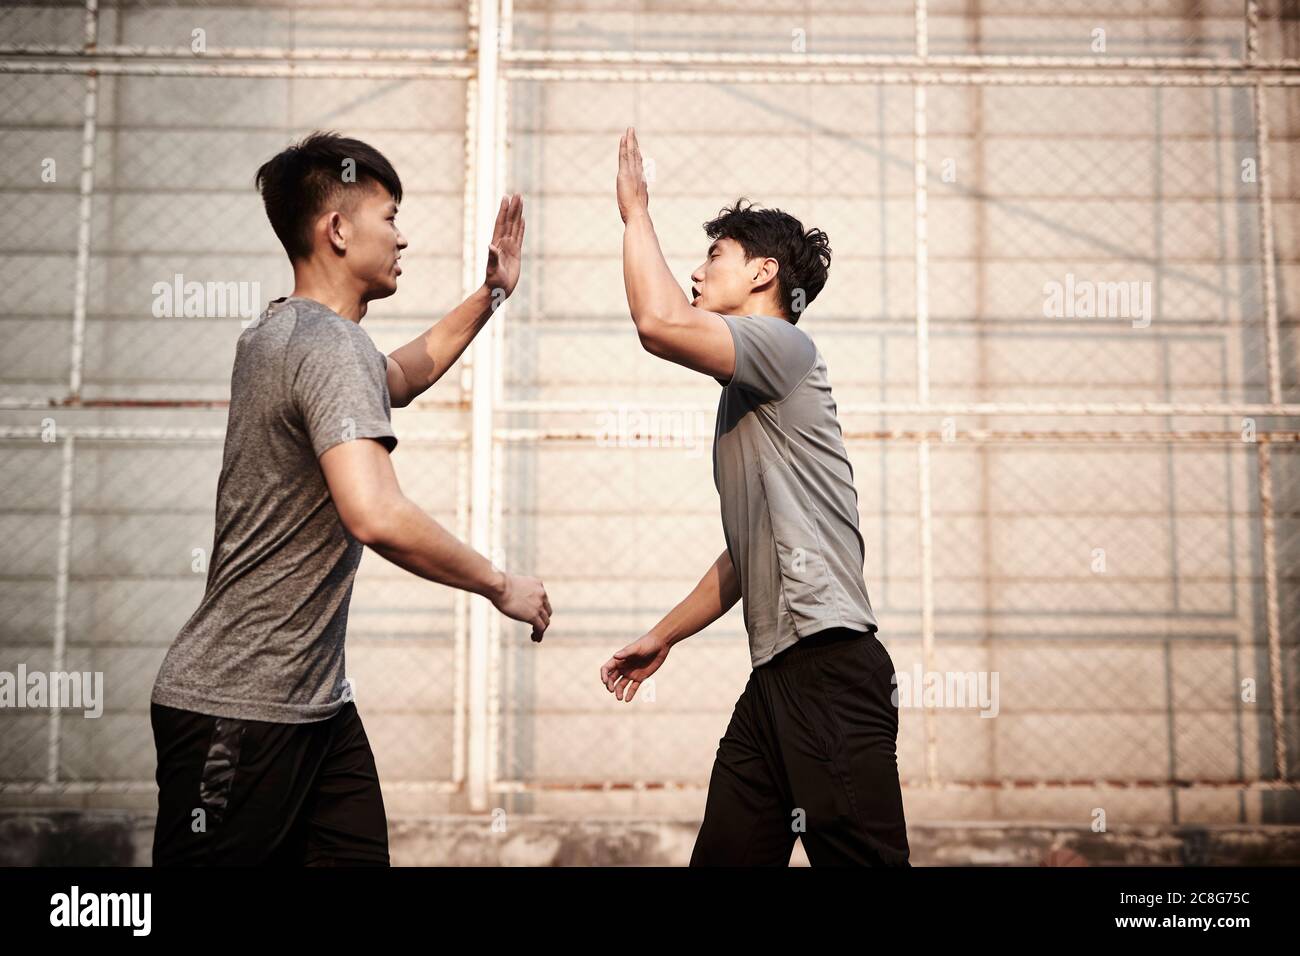 two young asian athletes giving hi-five celebrating success Stock Photo